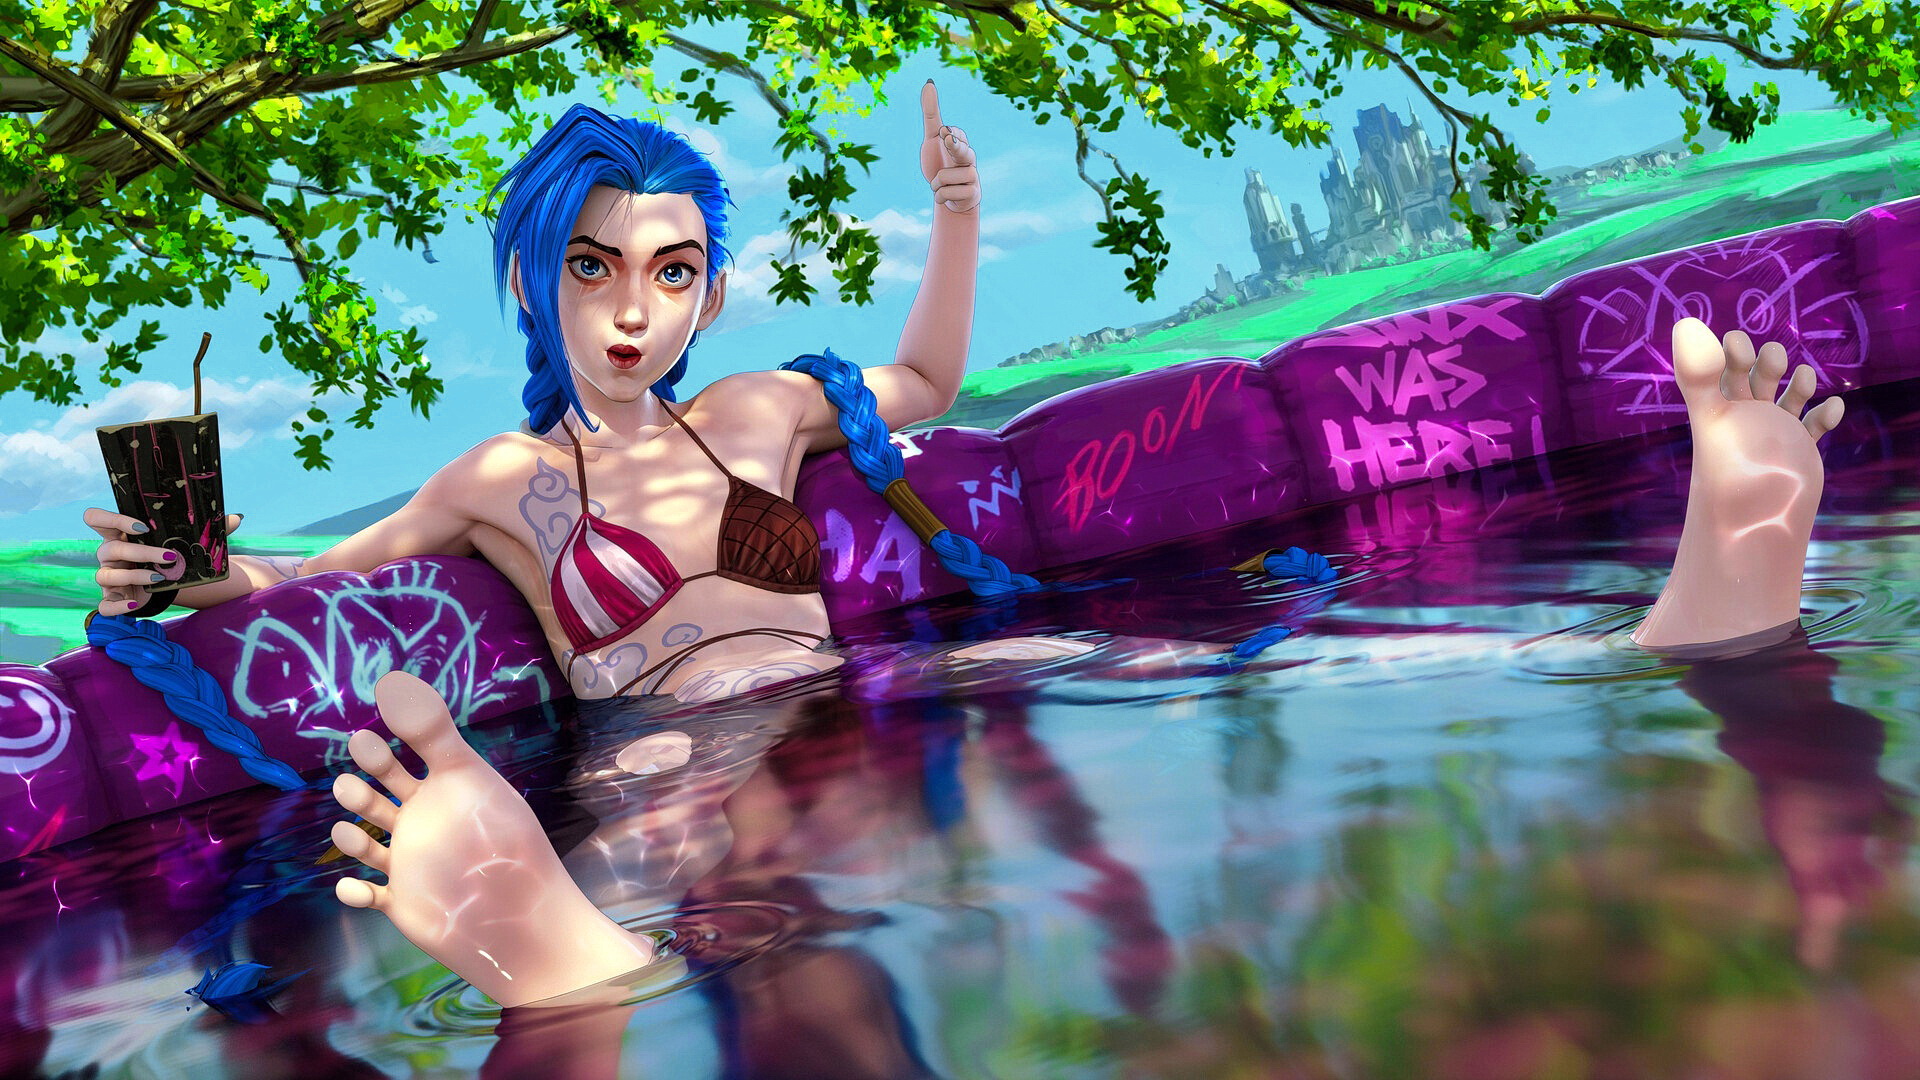 Free photo A girl with blue hair sits in the pool and holds a glass in her hand